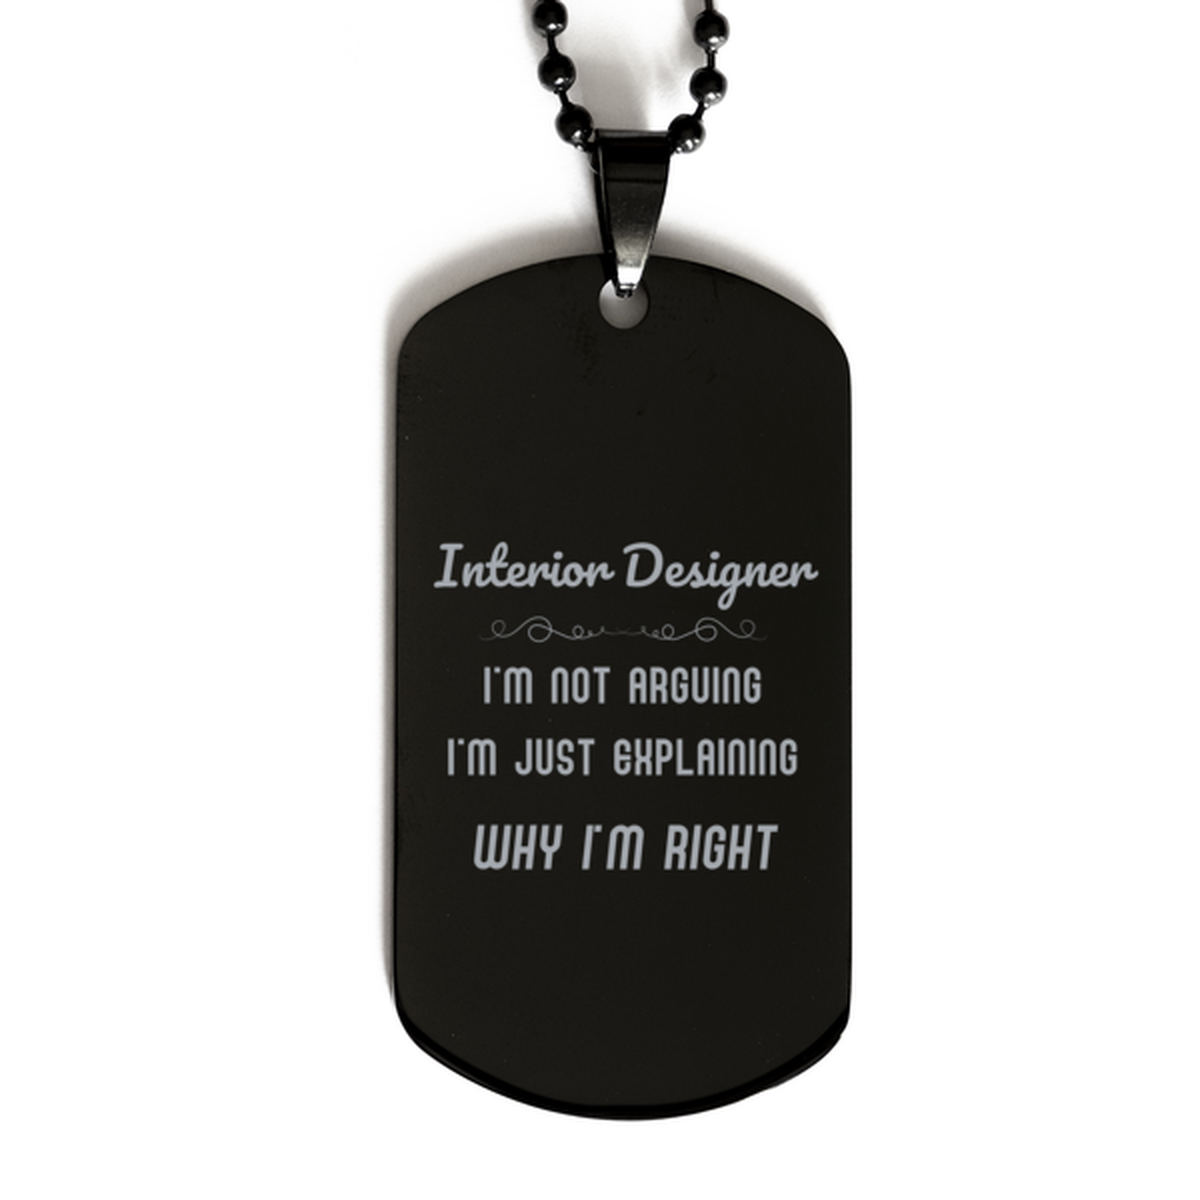 Interior Designer I'm not Arguing. I'm Just Explaining Why I'm RIGHT Black Dog Tag, Funny Saying Quote Interior Designer Gifts For Interior Designer Graduation Birthday Christmas Gifts for Men Women Coworker